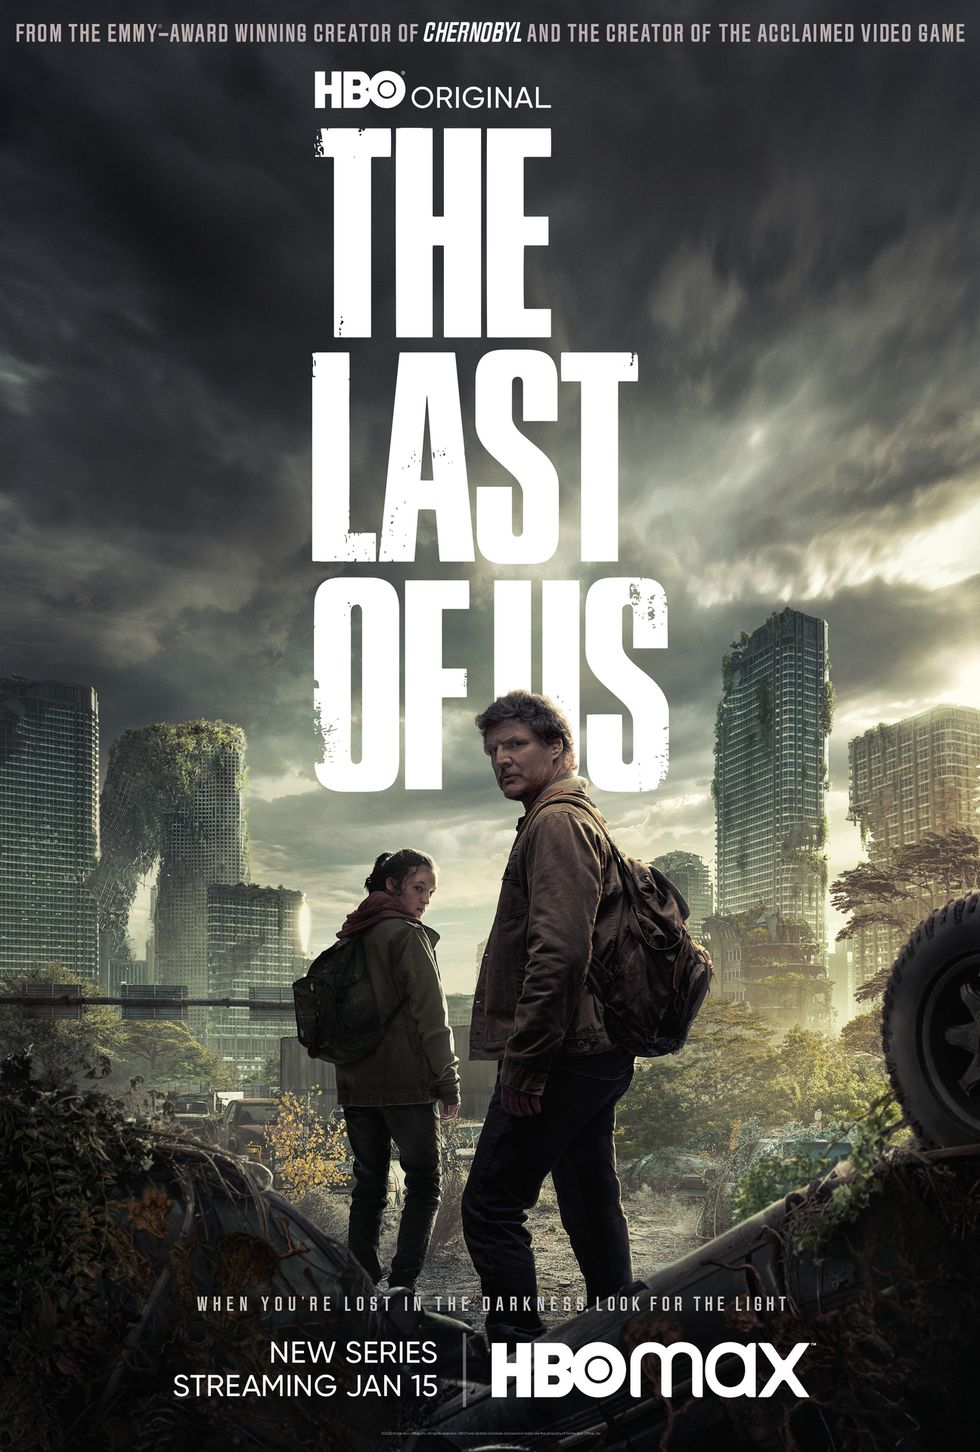 The Last of Us TV series episodes release schedule 👇 Mark your calendars  and get ready for an epic journey🔥 #TheLastOfUs #NaughtyDog #HBO  #PostPandemic #survivalgame #EllieJoel #gamingcommunity  #videogameadaptation #gamingcommunity #videogames #games